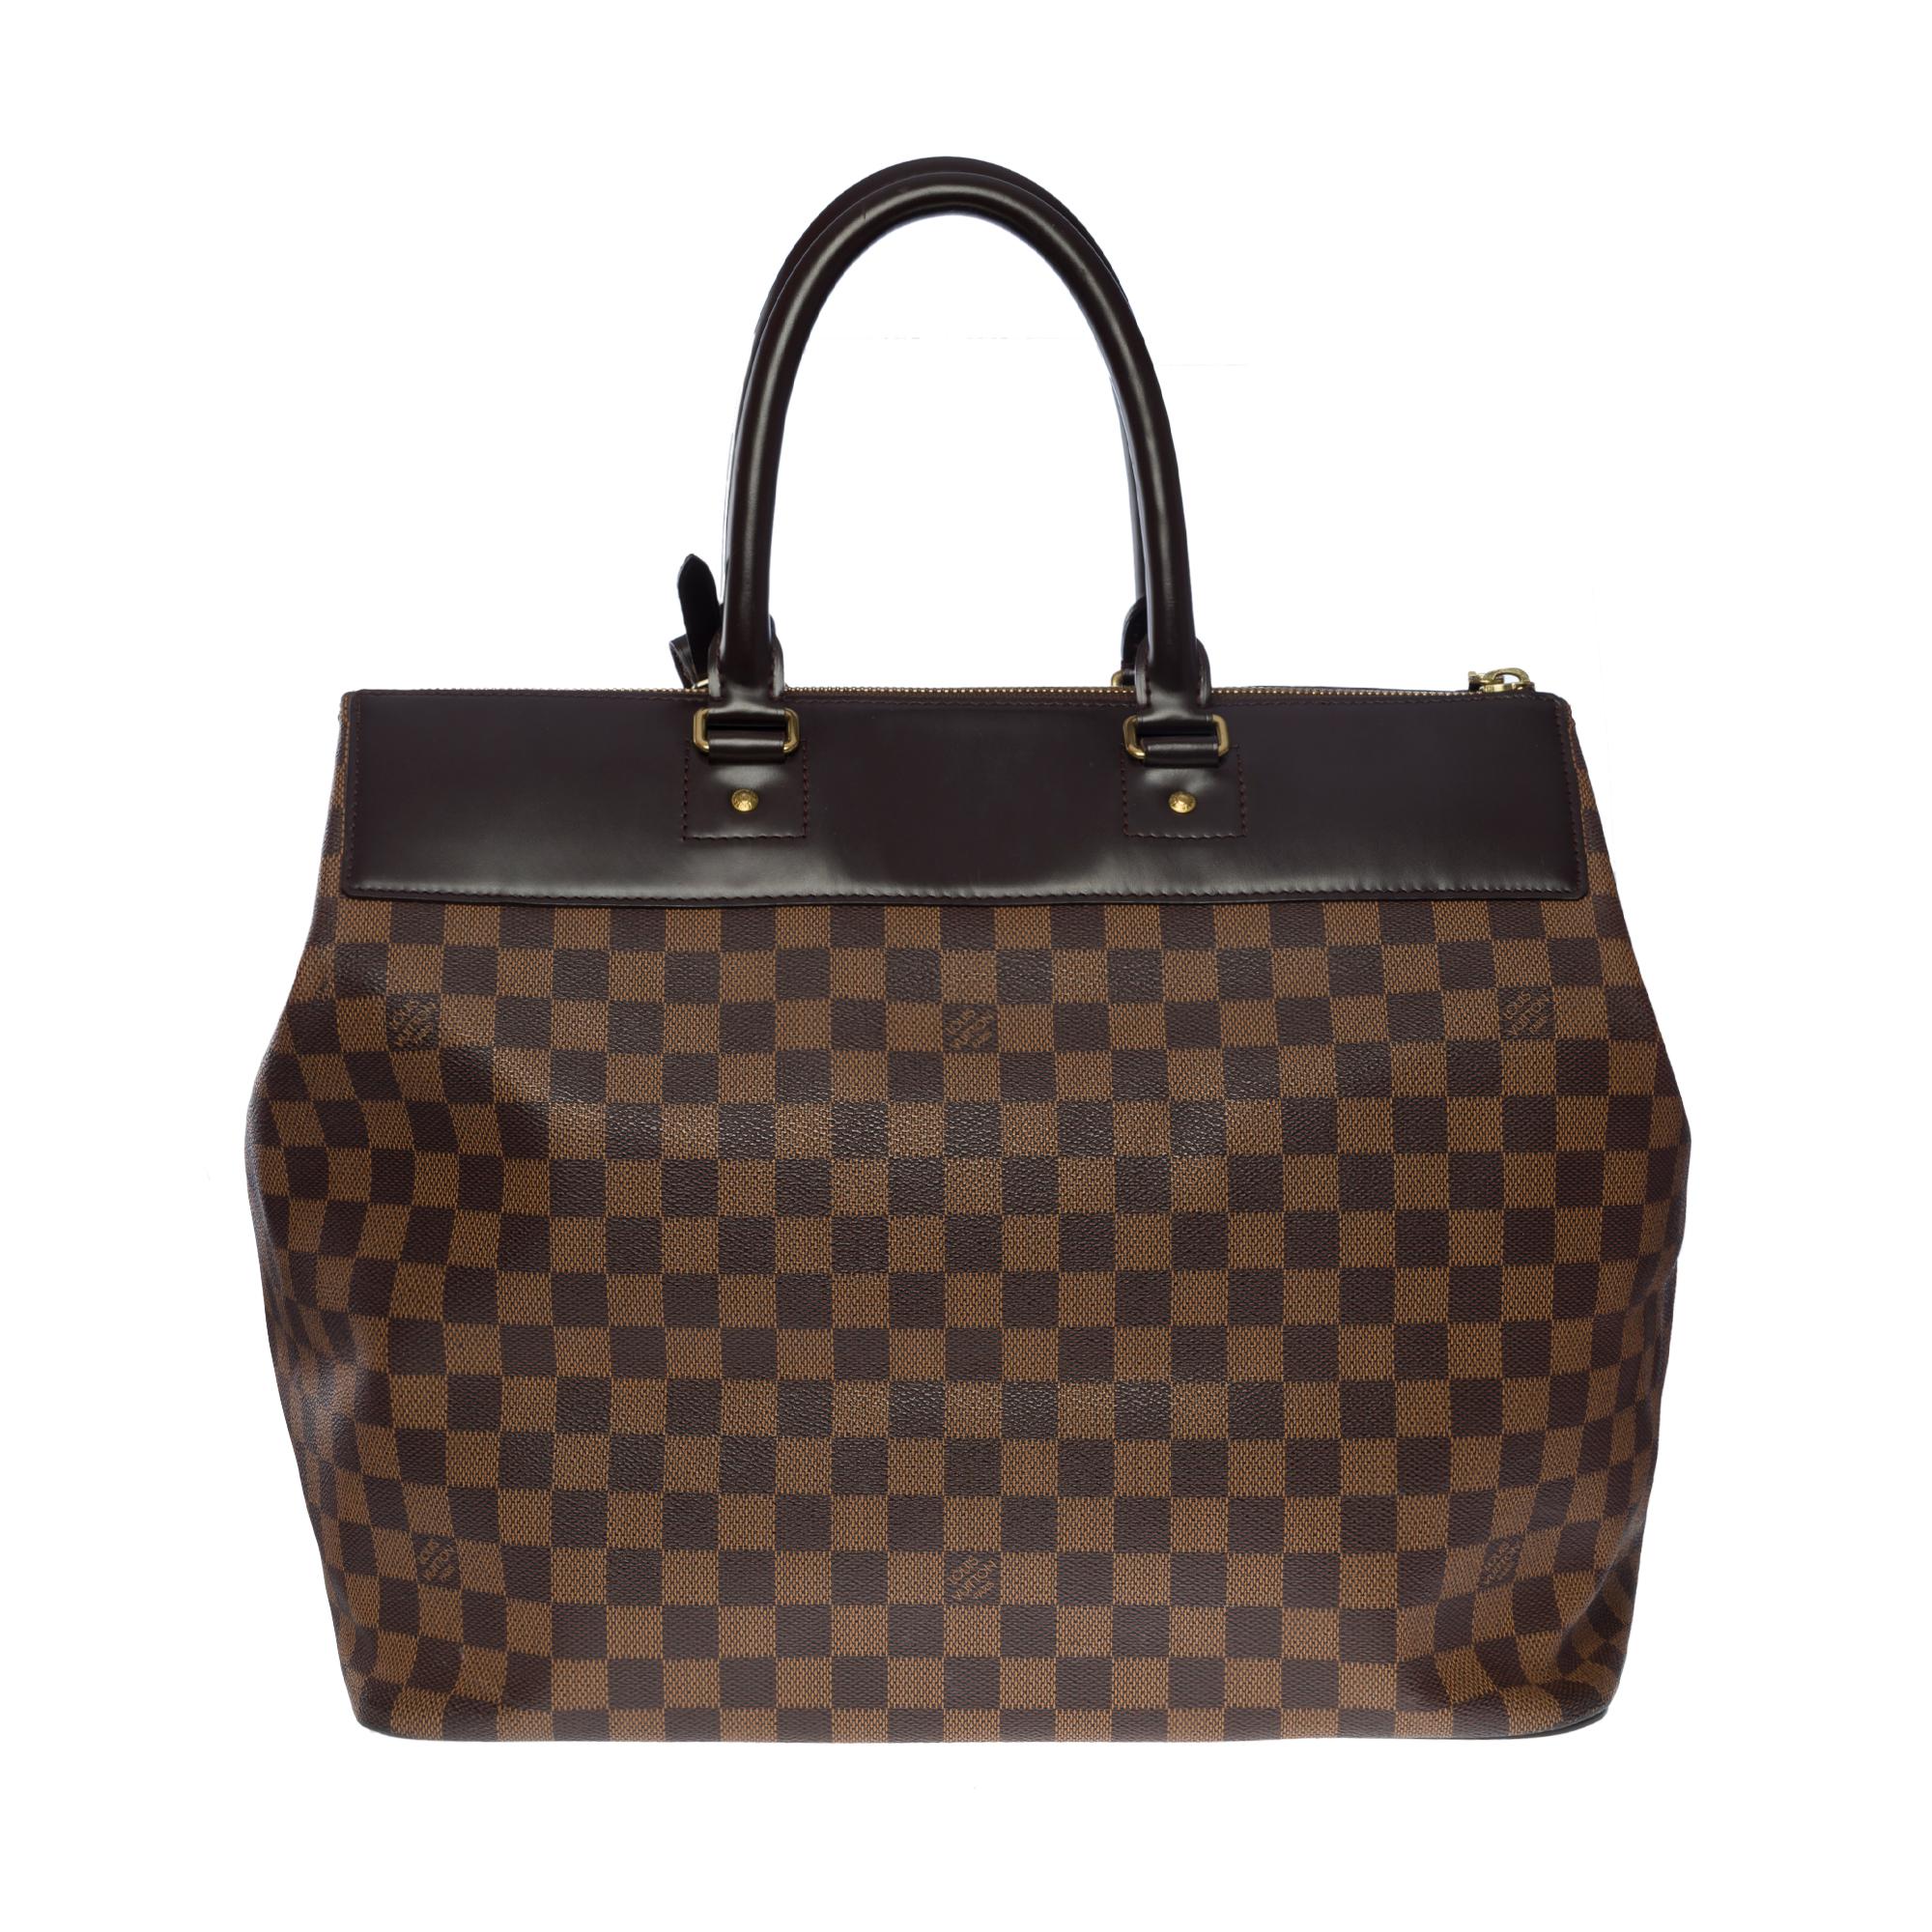 Elegant and masculine, this lightweight ebony checkered Neo Greenwich bag is for today’s traveler. Its iconic shape lends it a refined spirit, complemented by a generous volume, interior pockets and a snap closure system. The adjustable bag shoulder